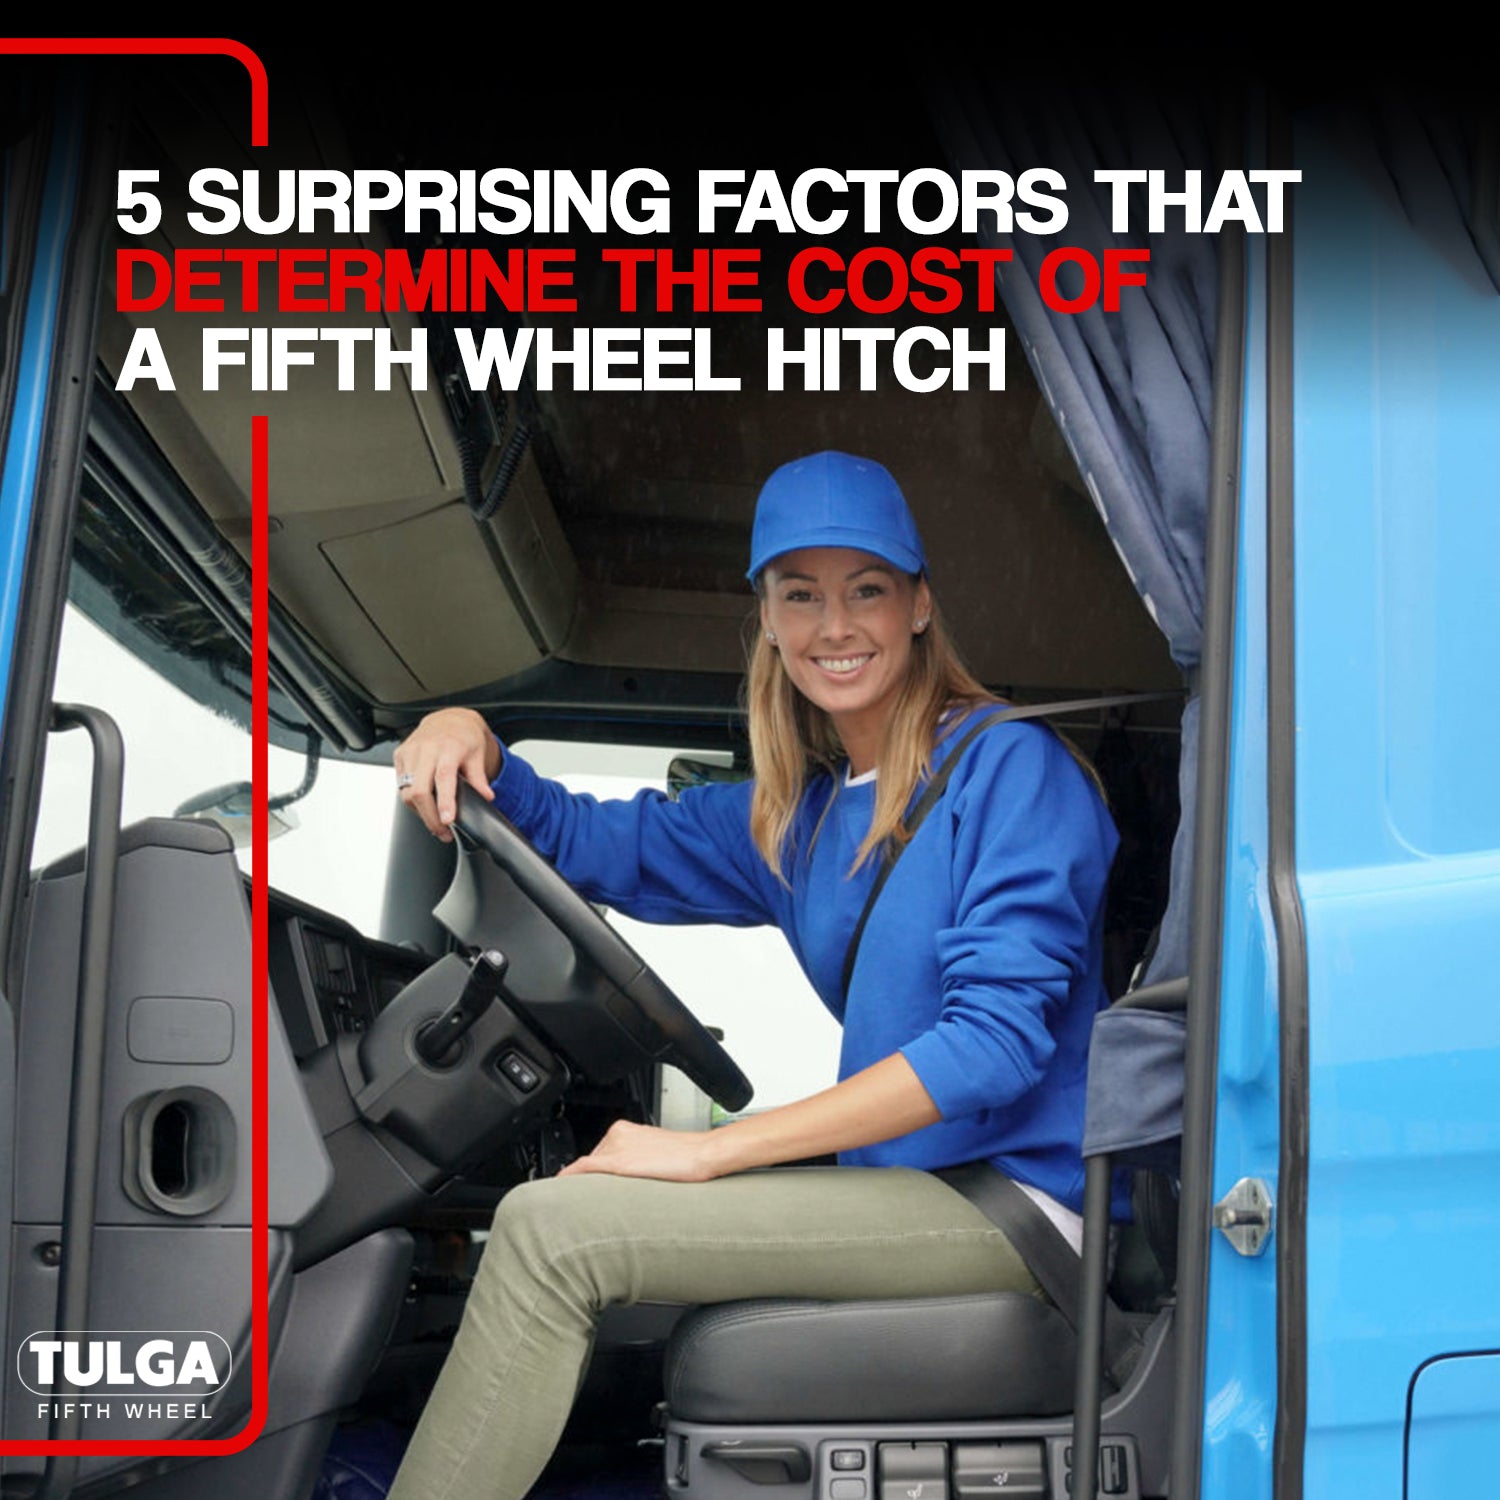 5 Surprising Factors That Determine the Cost of a Fifth Wheel Hitch